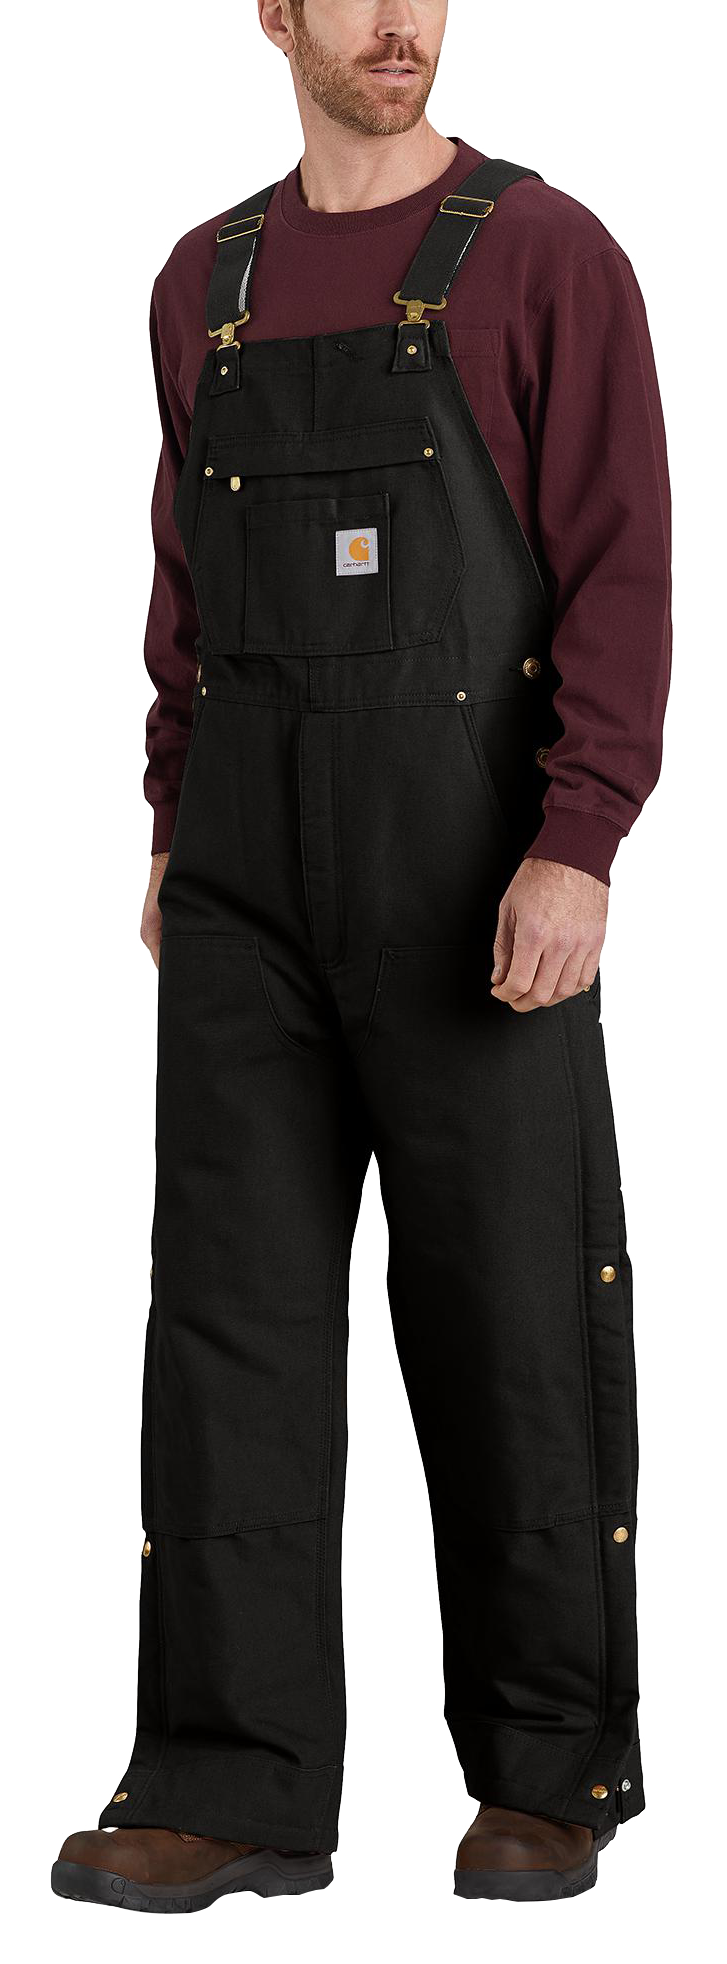  Carhartt mens Loose Fit Washed Duck Insulated Coverall,  Carhartt Brown, Small US: Clothing, Shoes & Jewelry